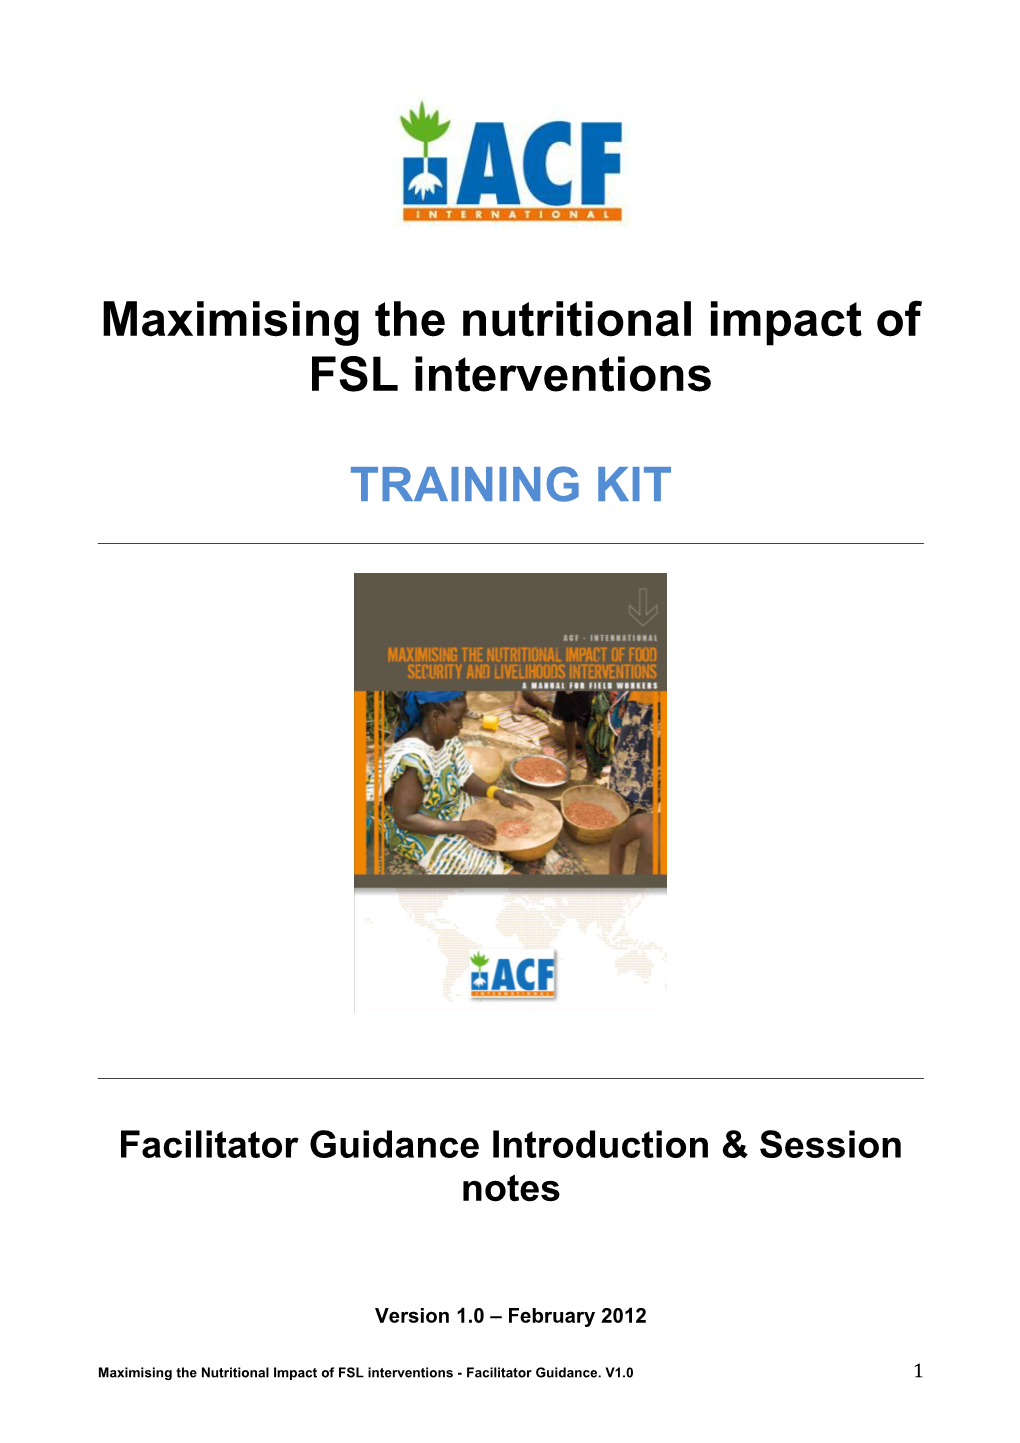 Maximising the Nutritional Impact of FSL Interventions